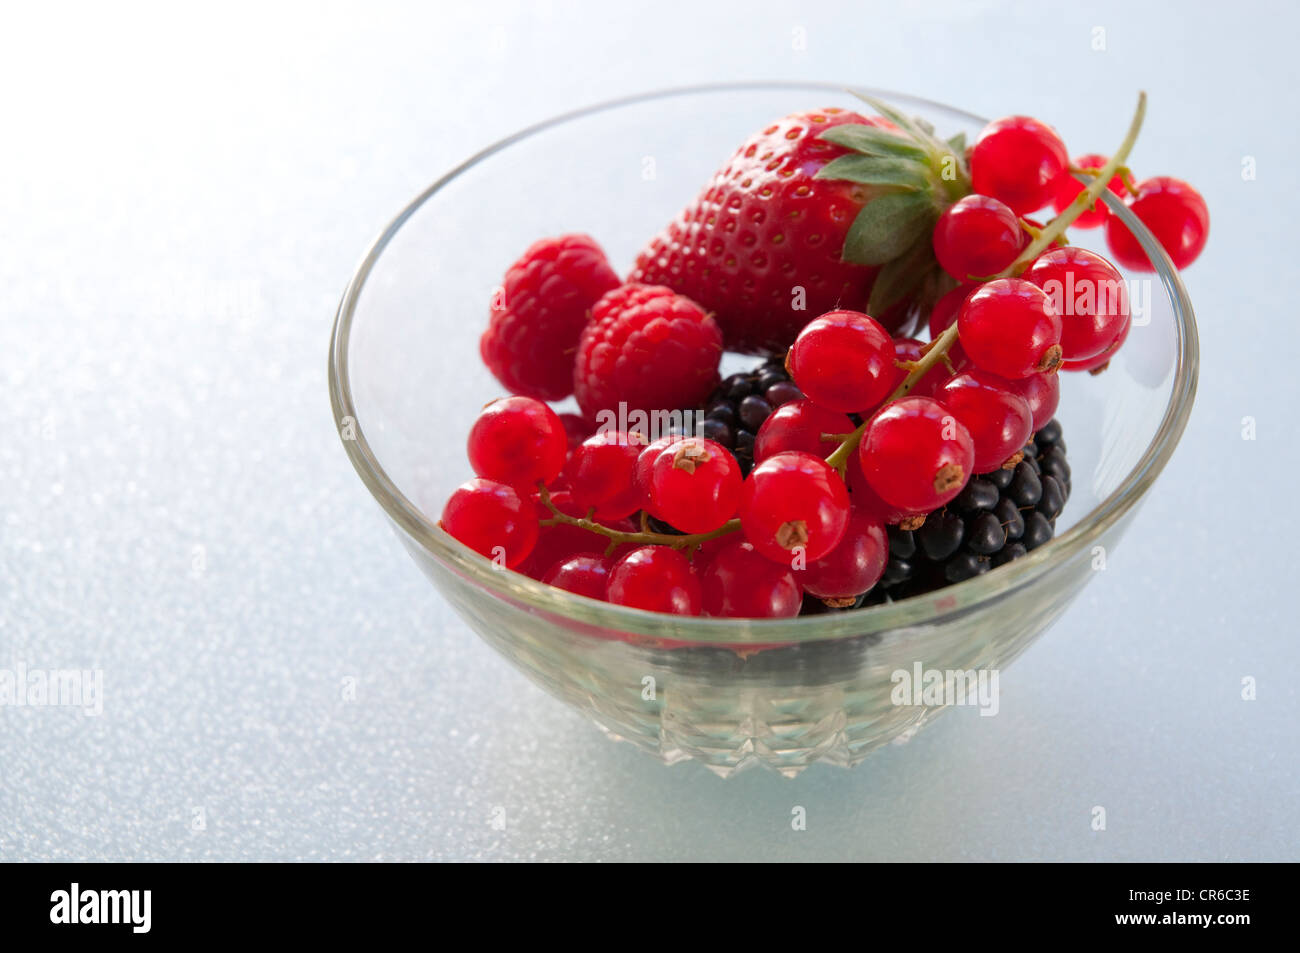 Red fruits in a fruit bowl. Close view. Stock Photo